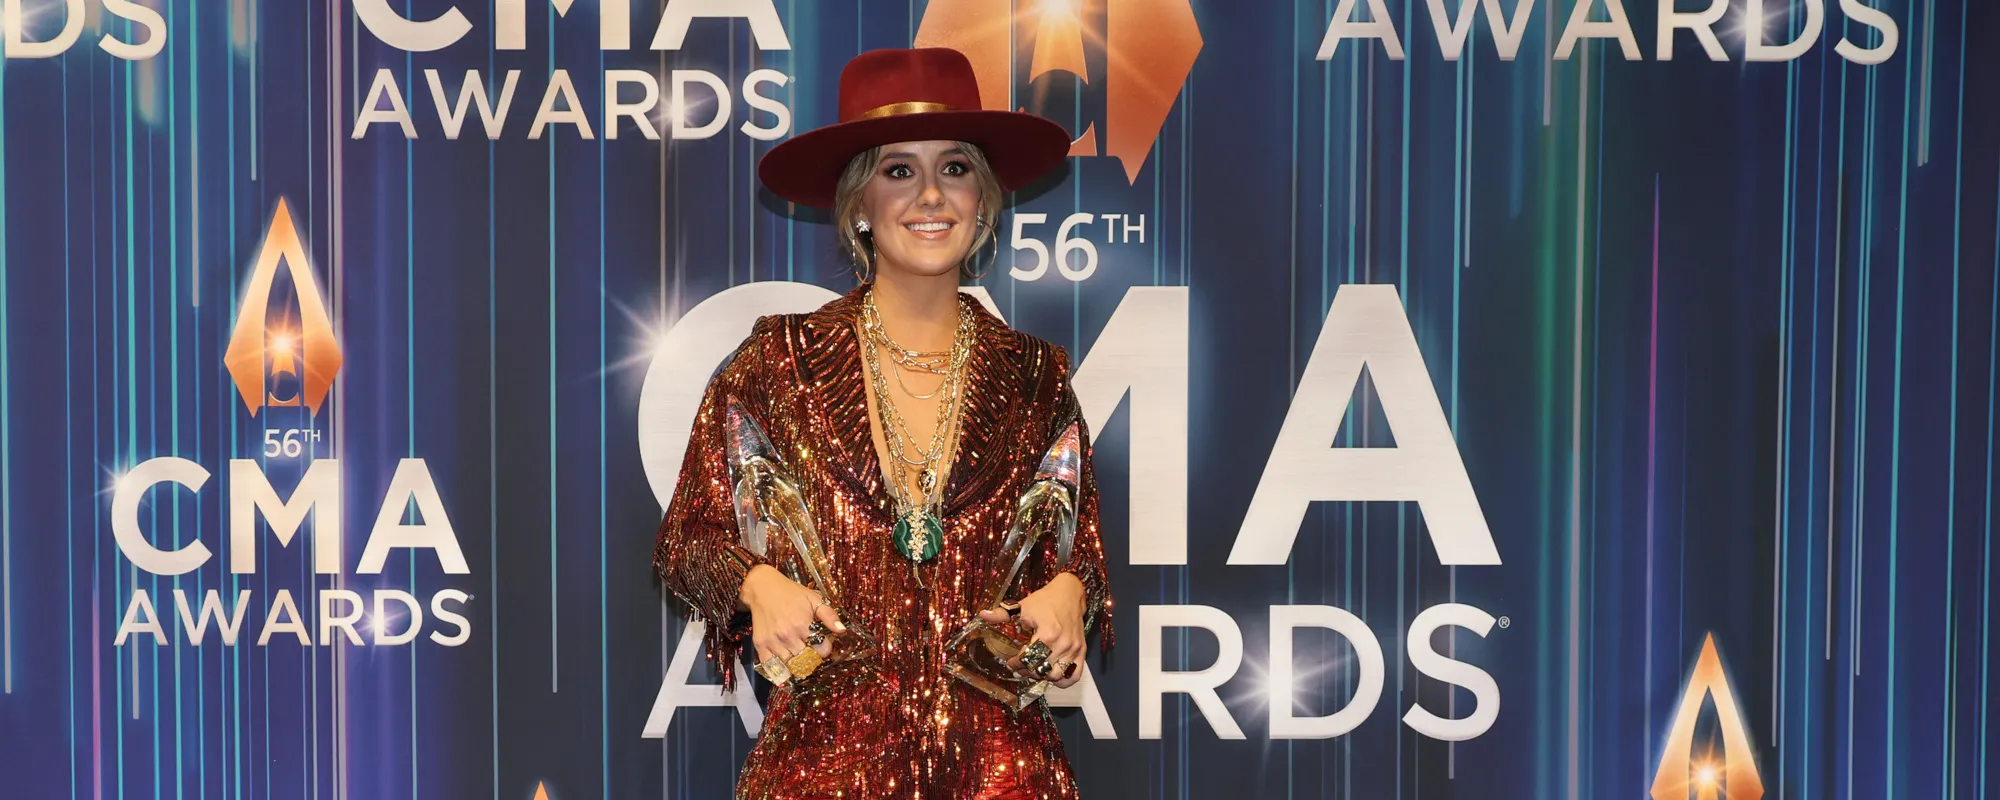 7 Things We Learned Backstage at the 2022 CMA Awards